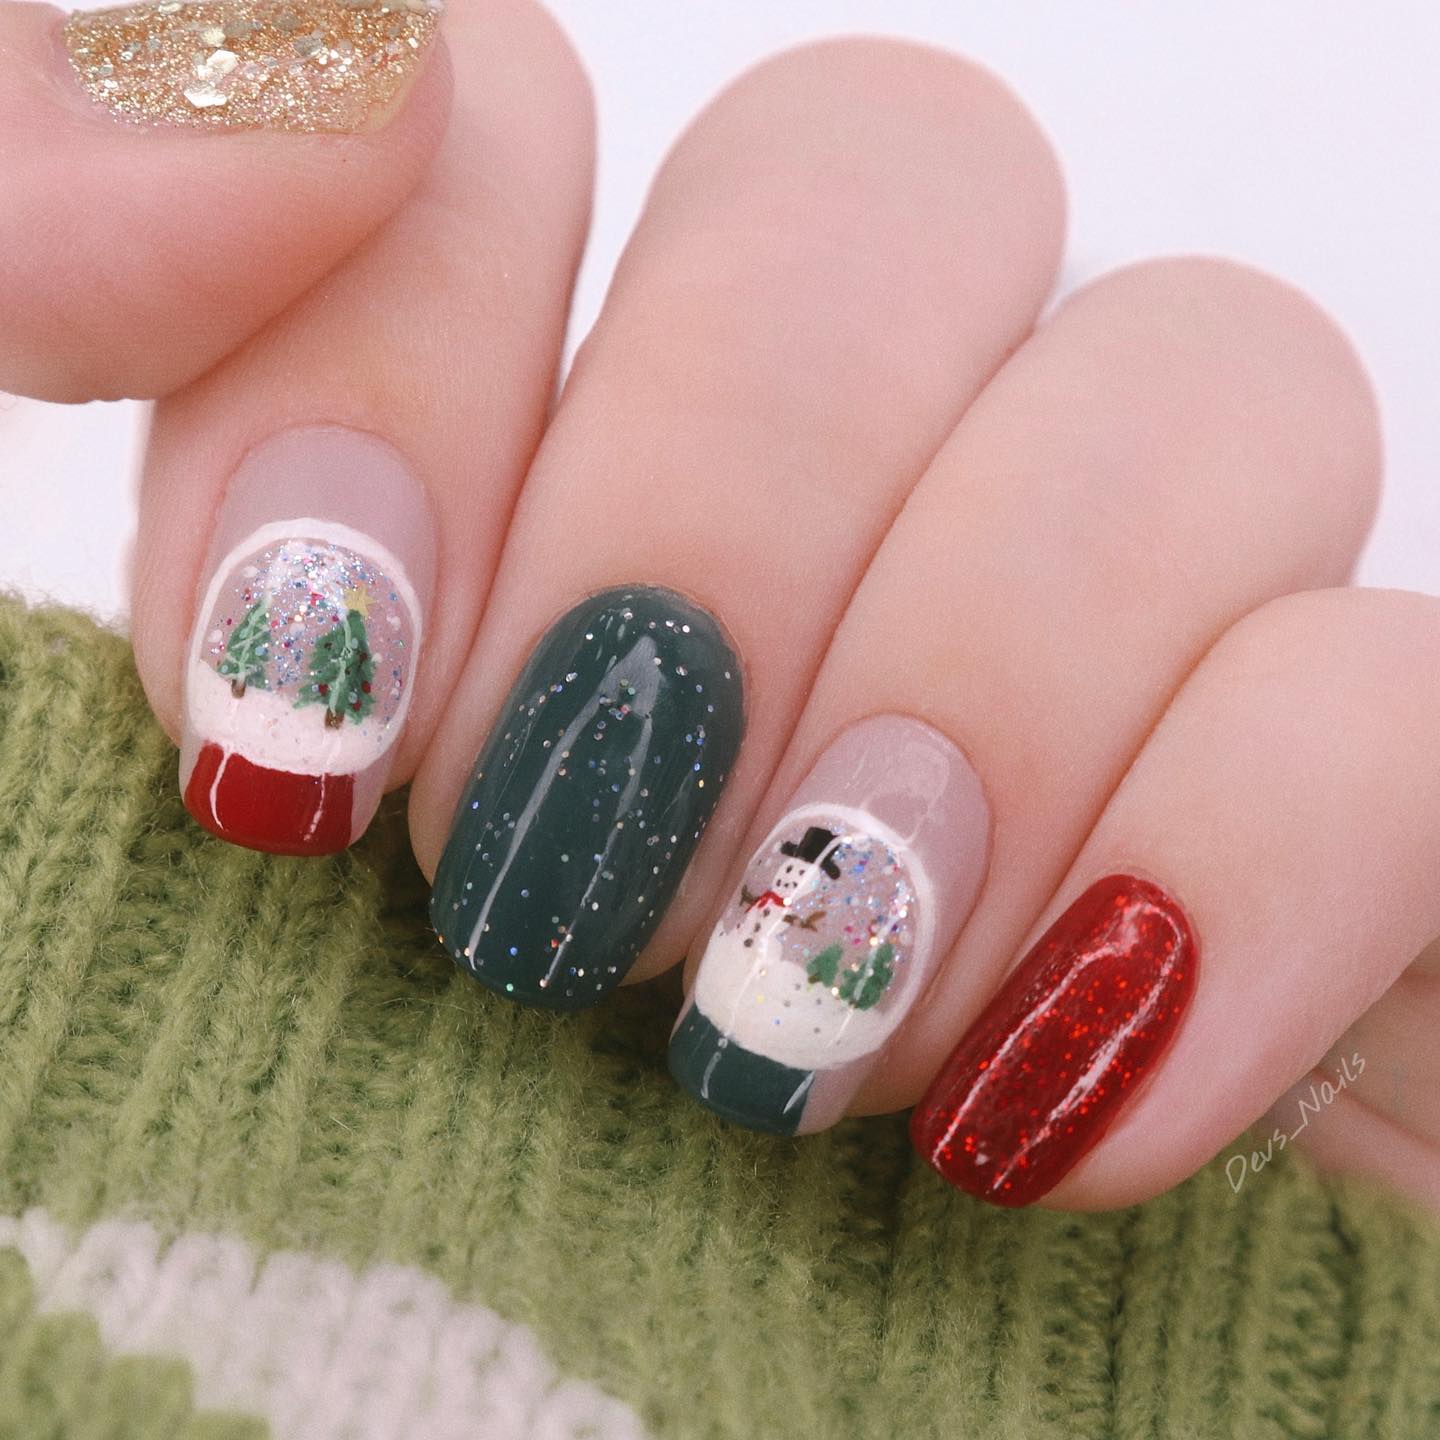 43 Festive Christmas Nail Designs To Wear For the Holidays - Pretty Sweet